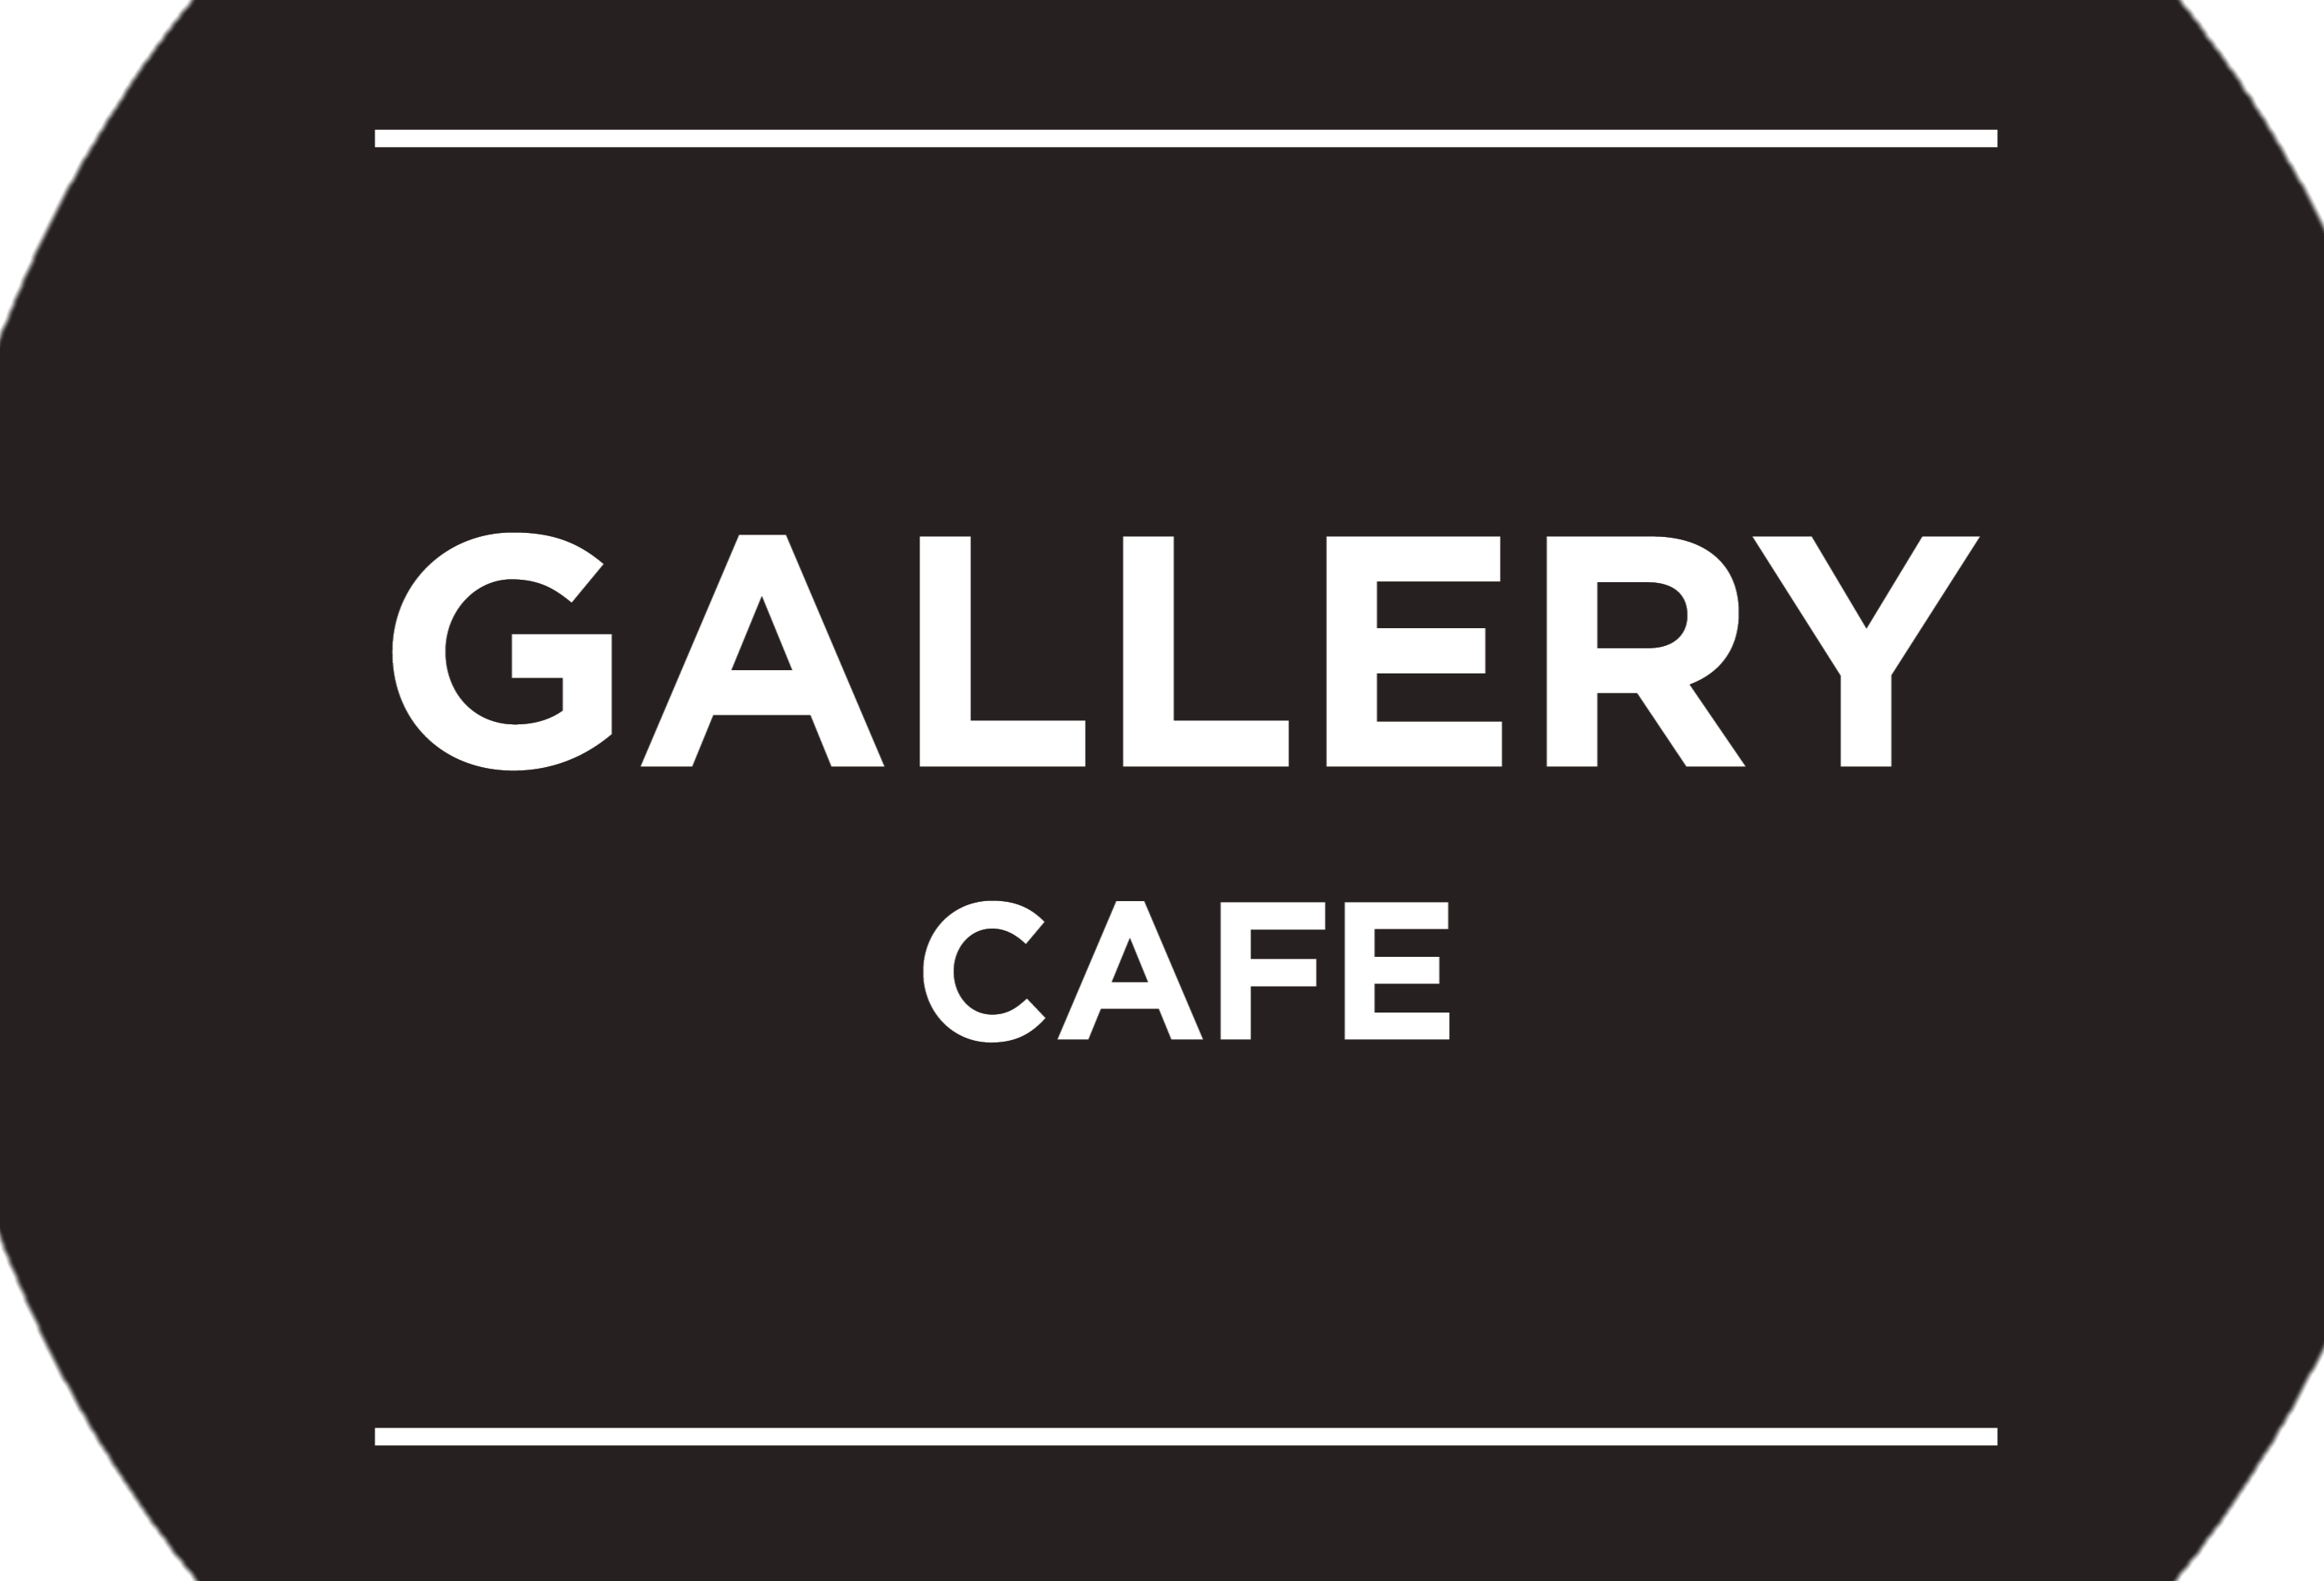 24/7 Gallery Cafe